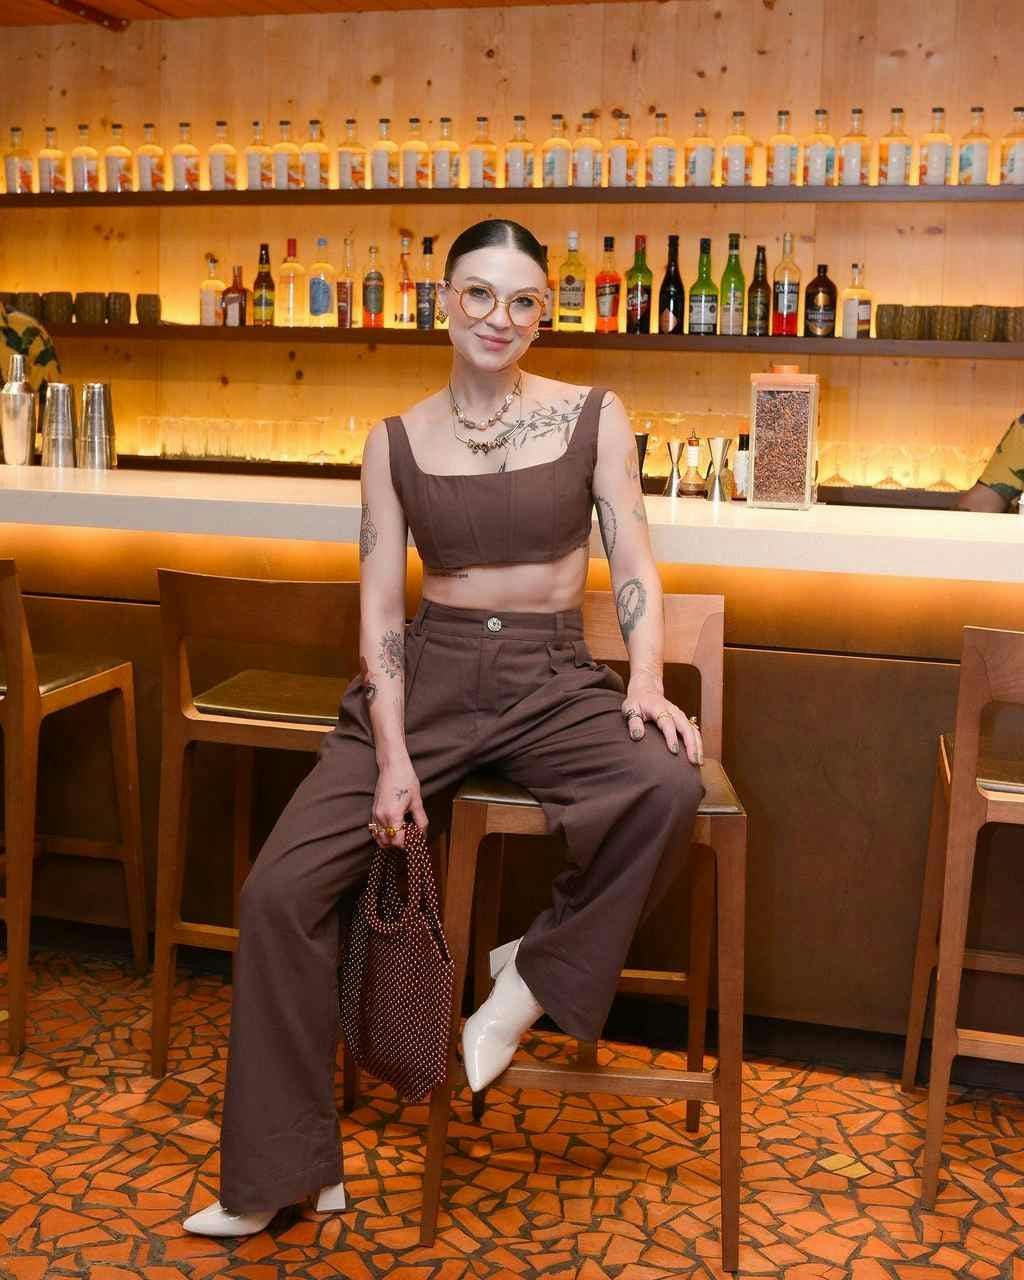 person sitting blouse clothing bar